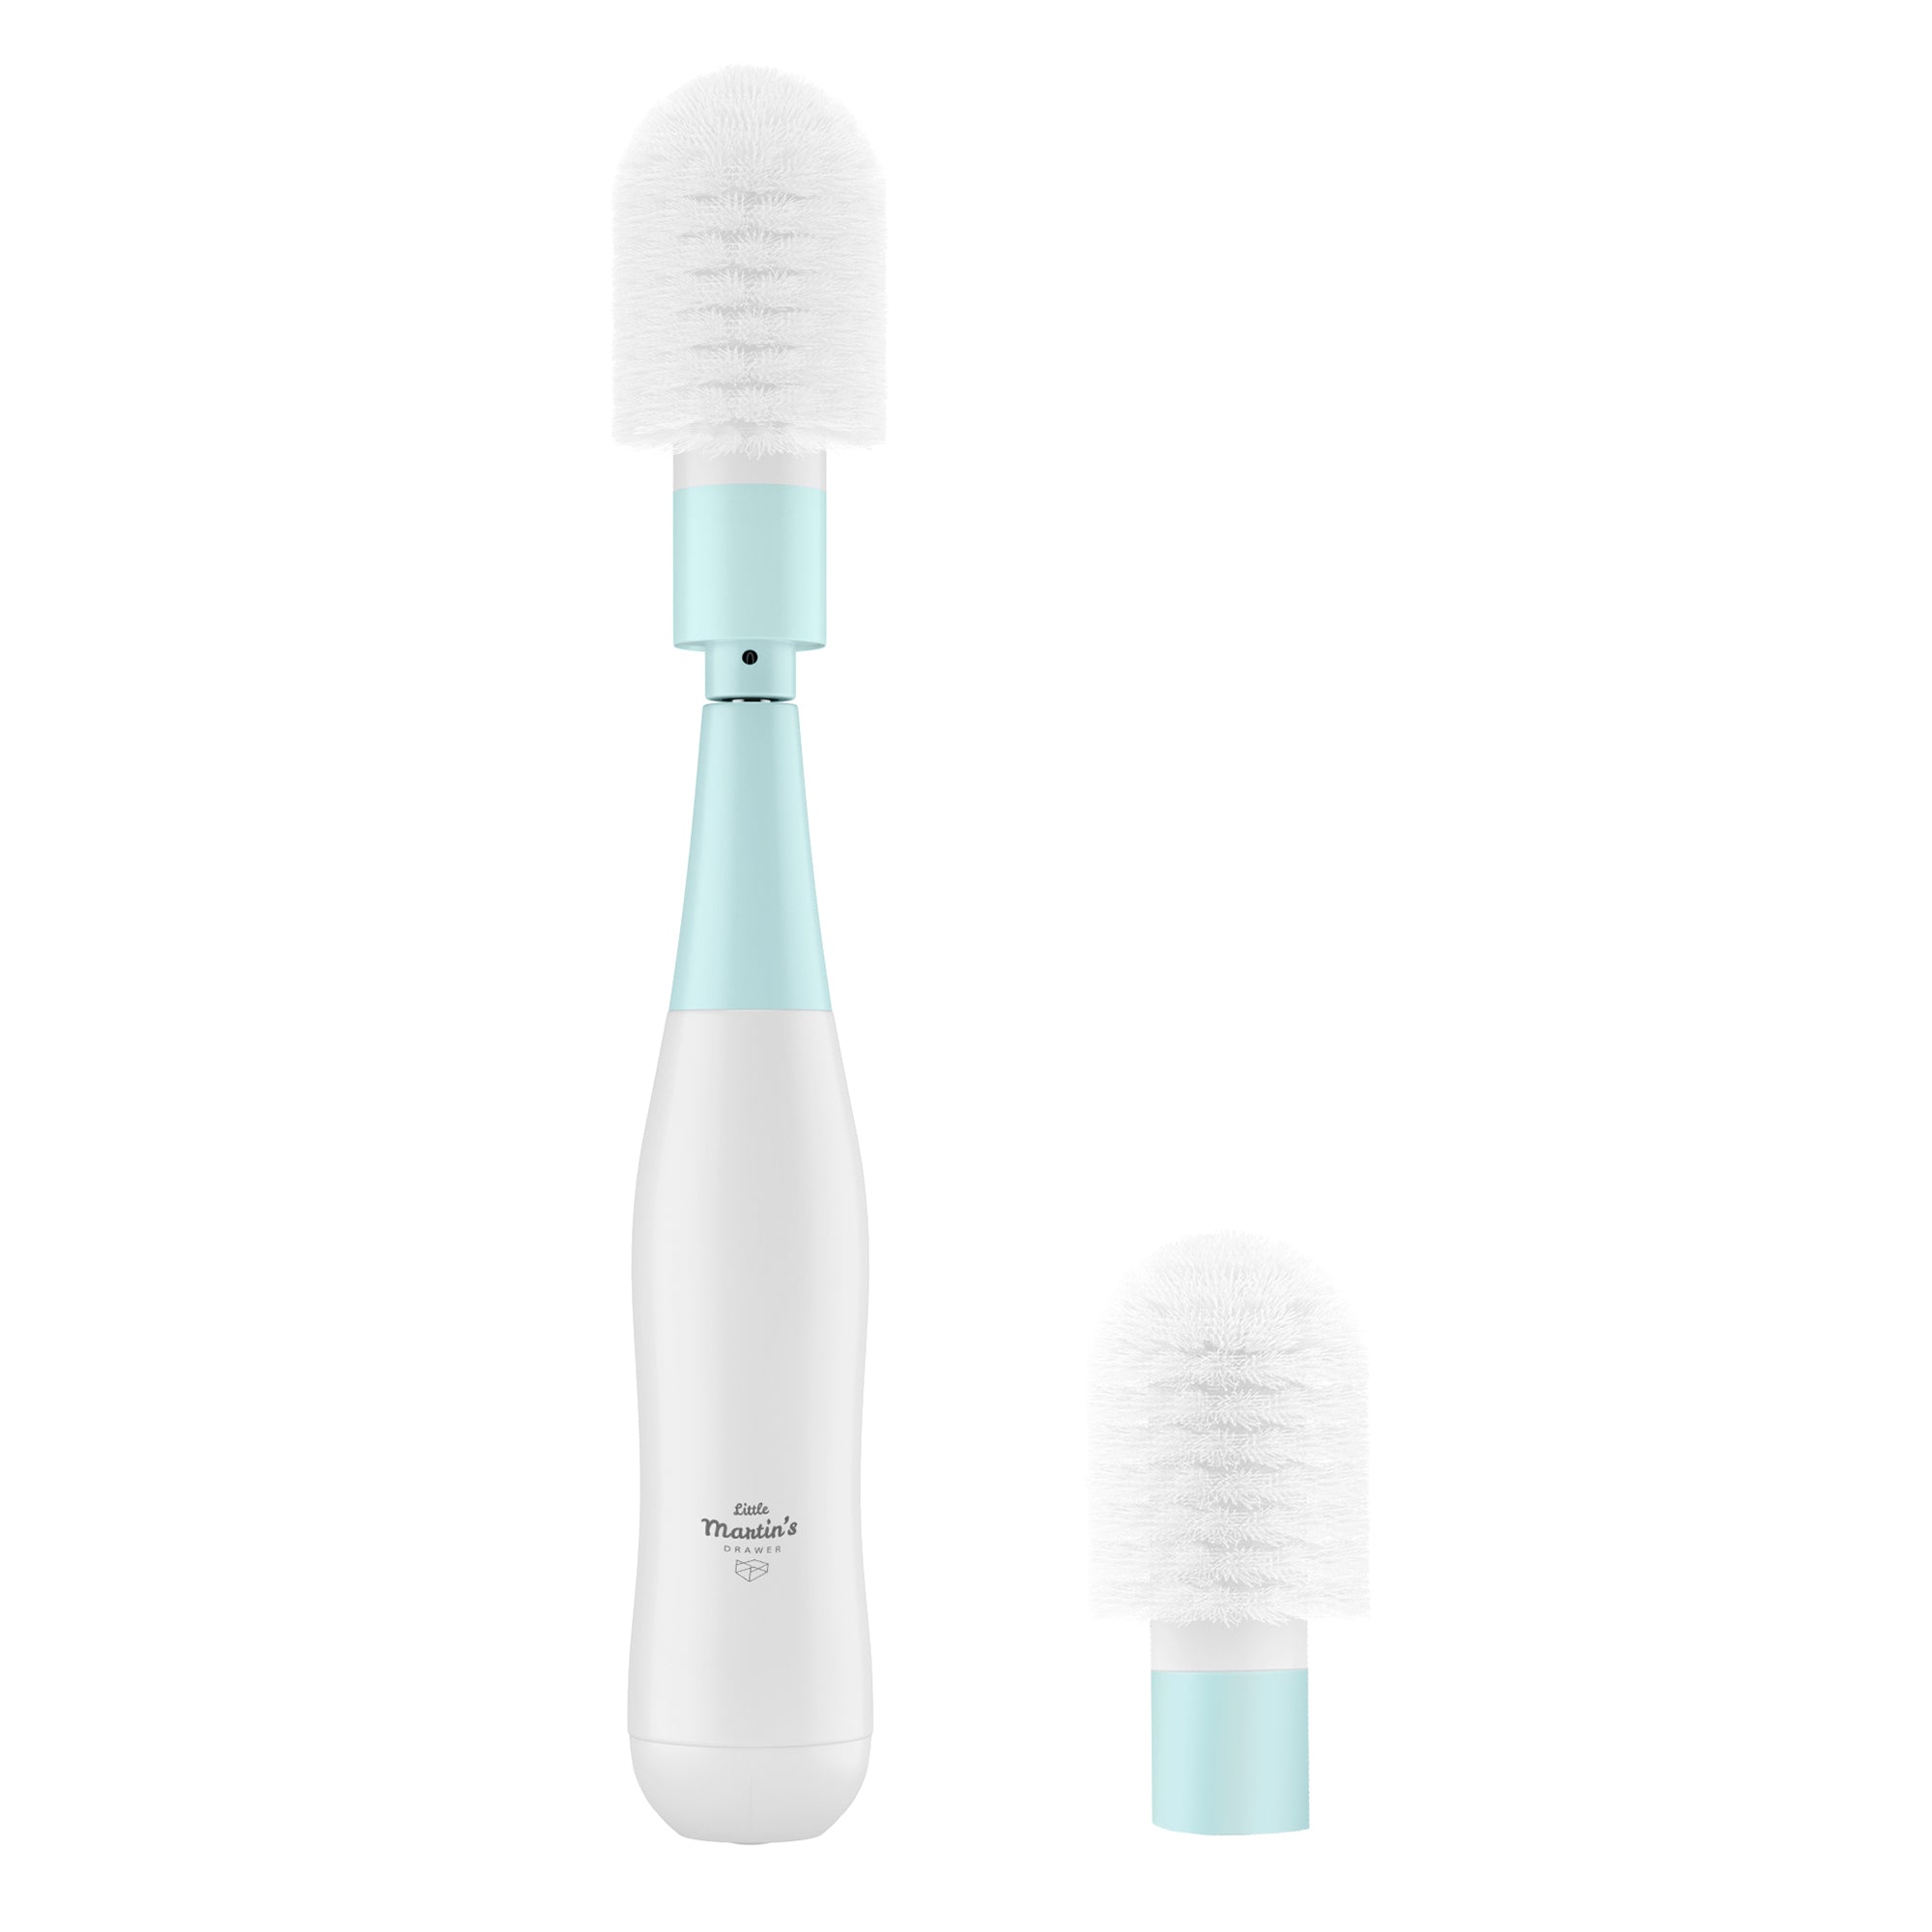 Slovia Blue Bottle Cleaning Brush, Buy Baby Care Products in India